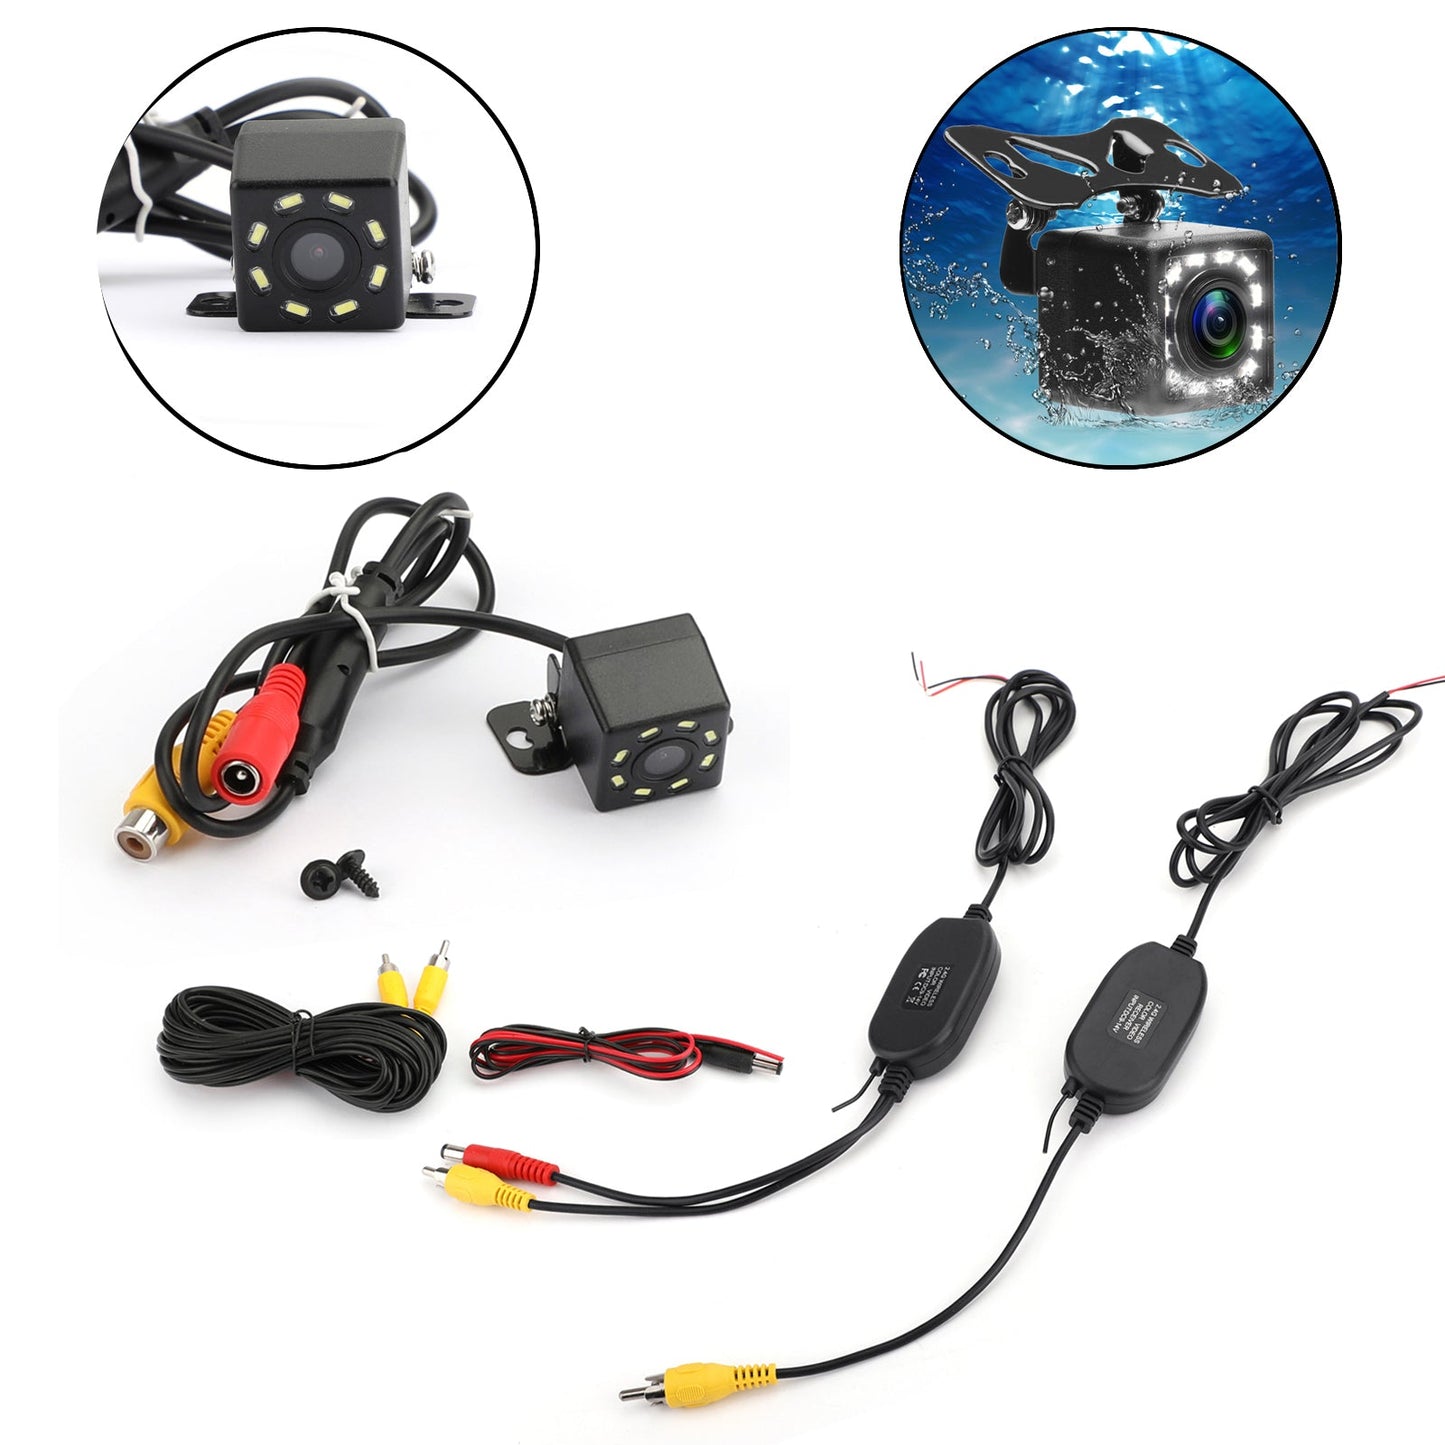 HD Wireless Video Transmitter and Receiver + 8LED HD Backup Camera Car Rear Front Side View 2.4GHz Generic